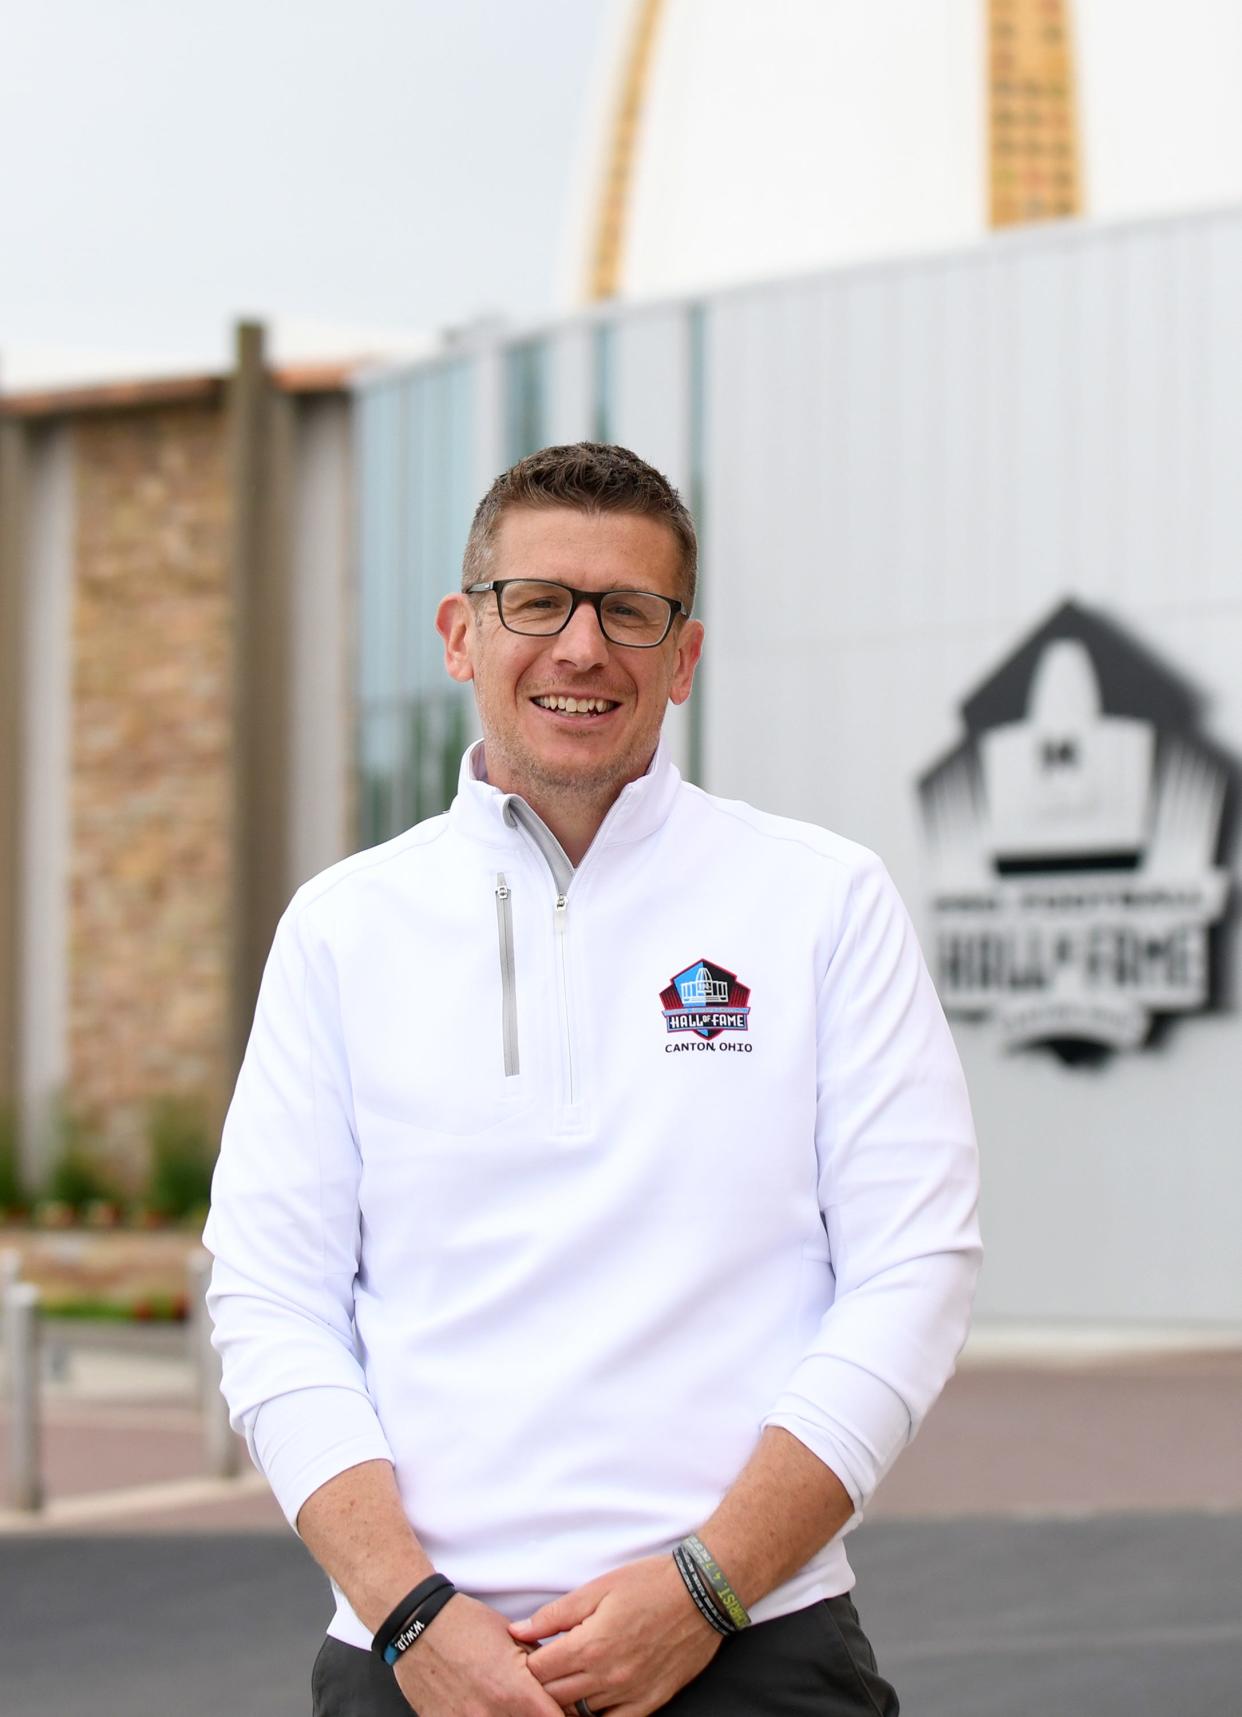 Jerry Csaki serves as director of youth and education at the Pro Football Hall of Fame in Canton. He has worked at the Hall for more than 20 years.